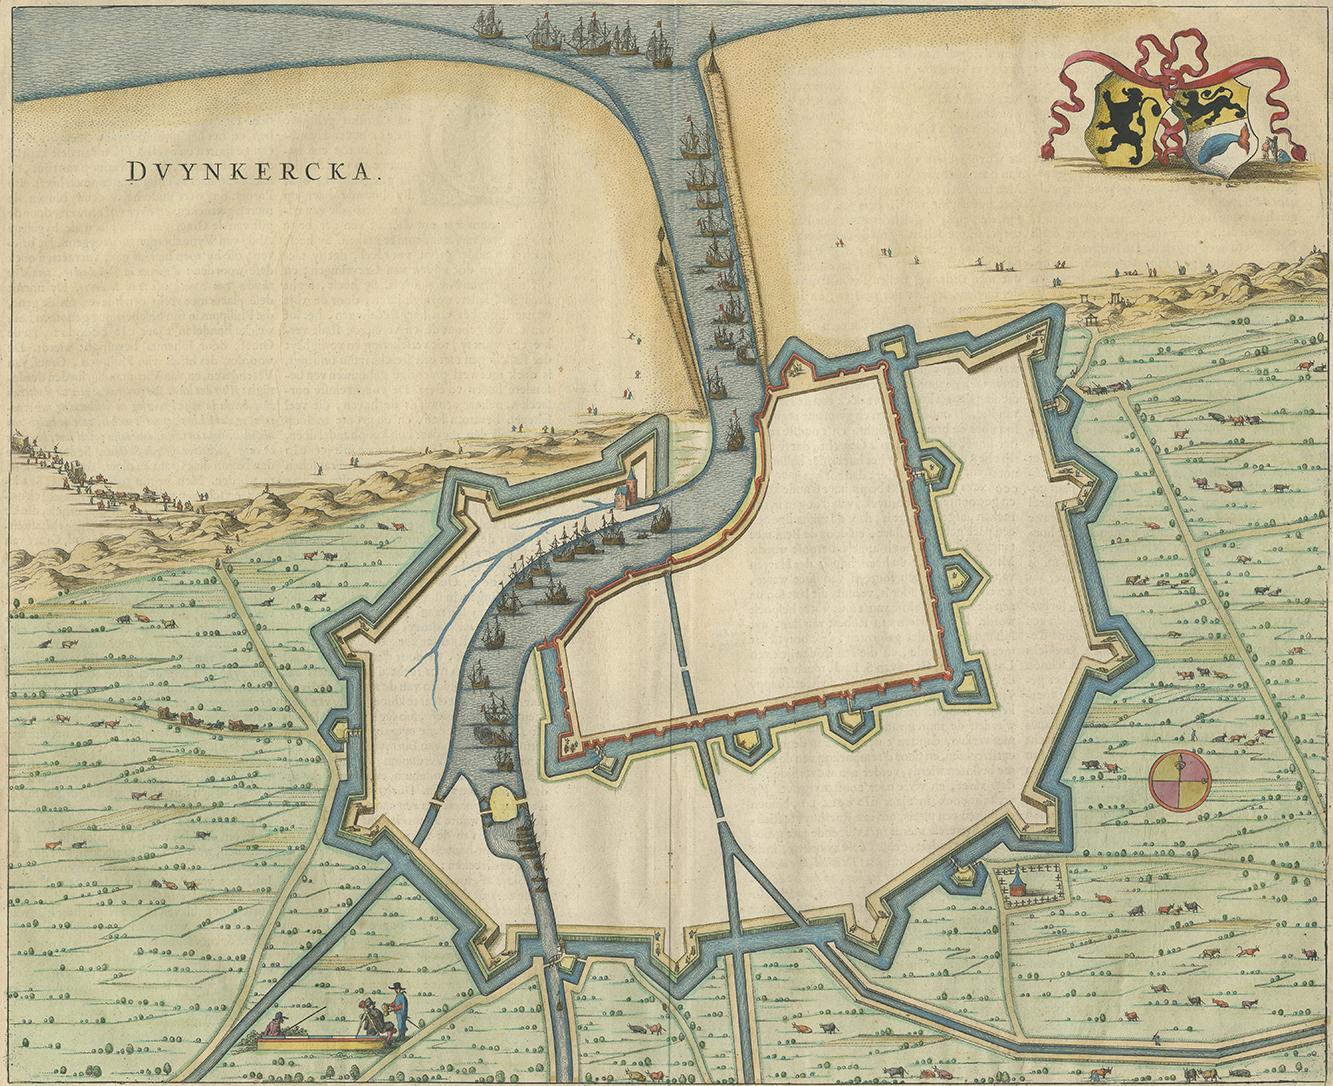 Antique map titled 'Duynkercka'. Published by J. Blaeu, 1649. Dutch text on verso.